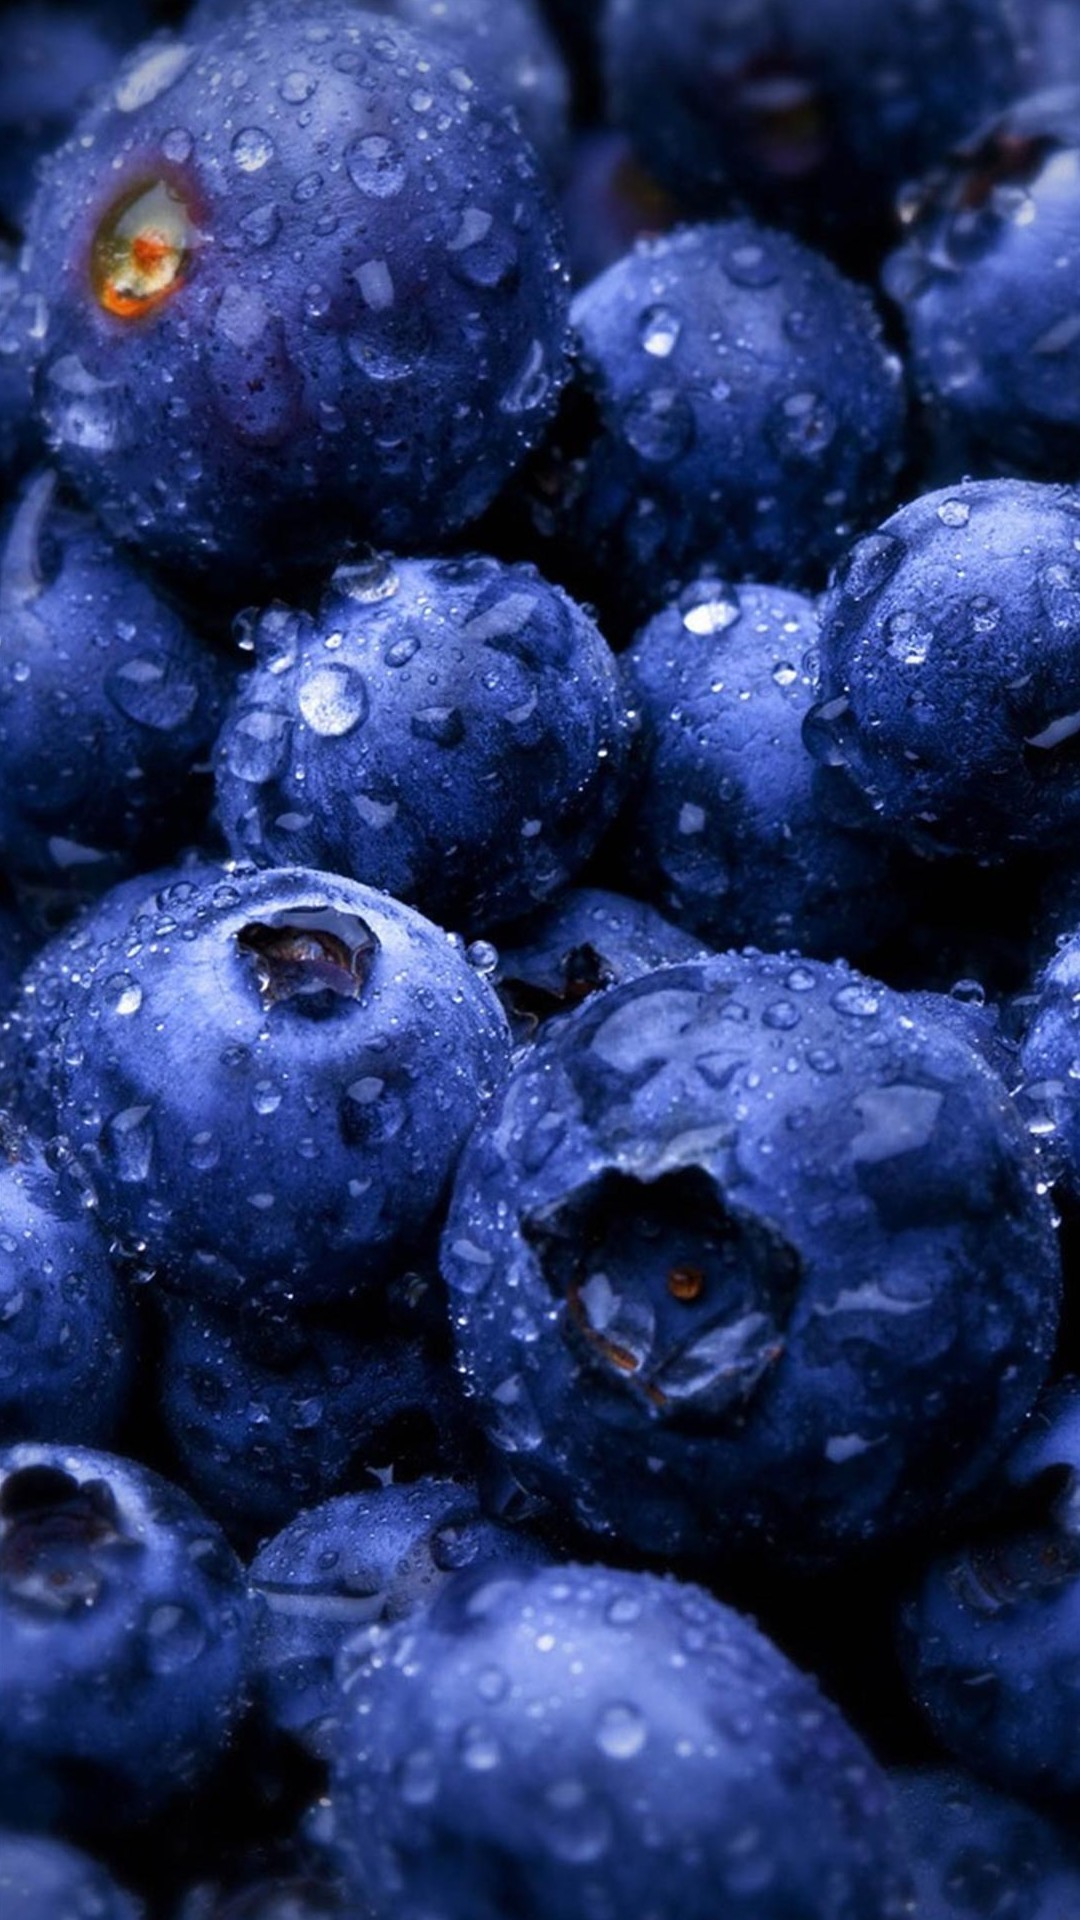 1080x1920 HD Blueberries Fruit Water Drops Android Wallpaper